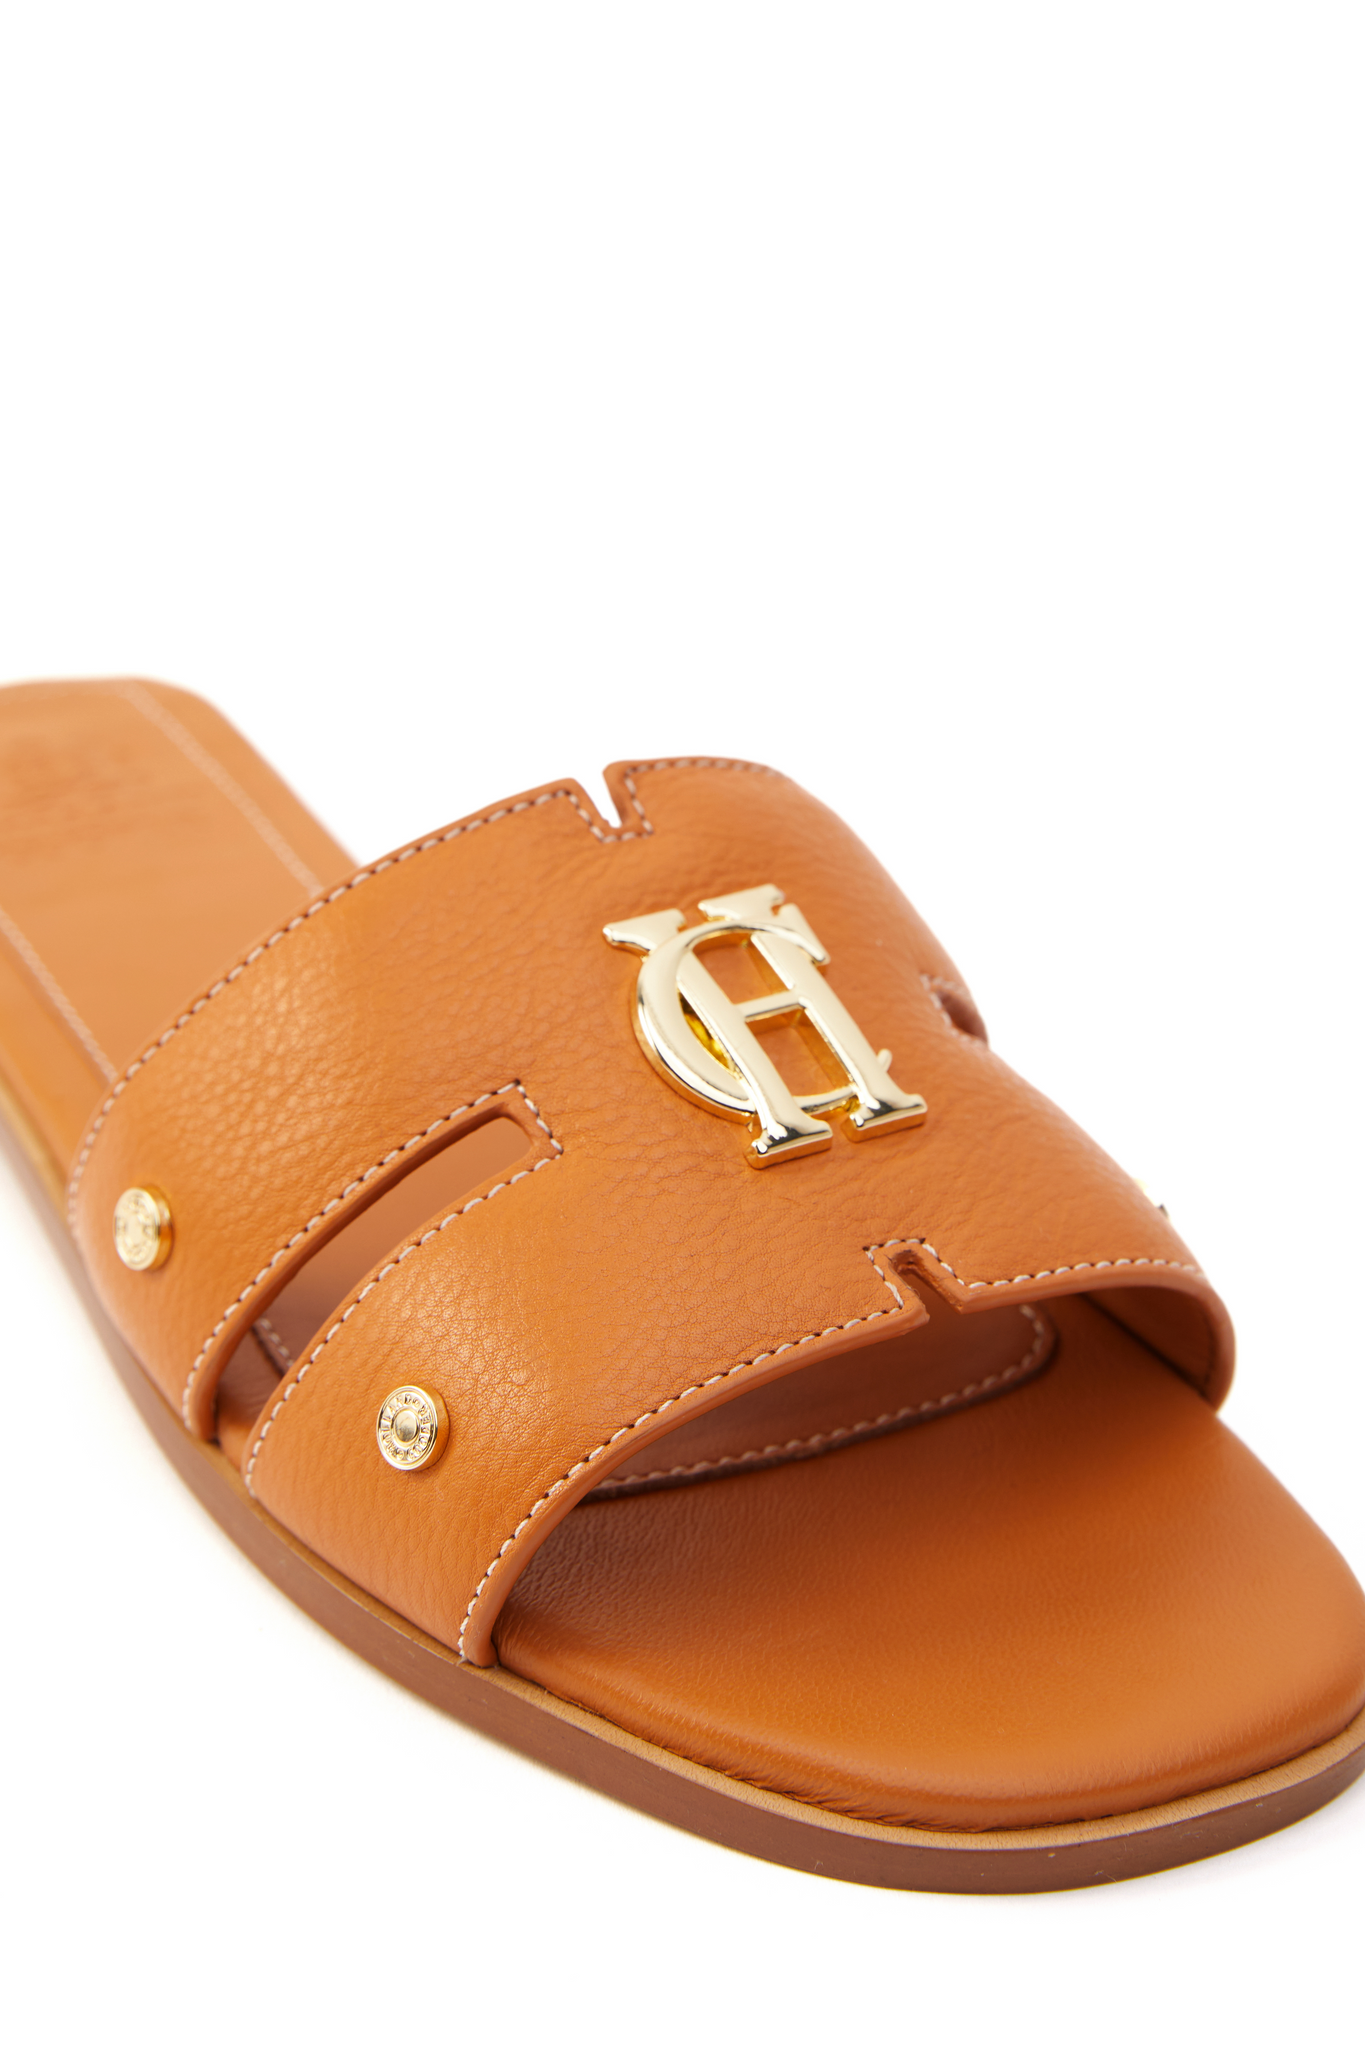 Close up of tan leather sliders with contrast white stitching, a tan leather sole and gold hardware